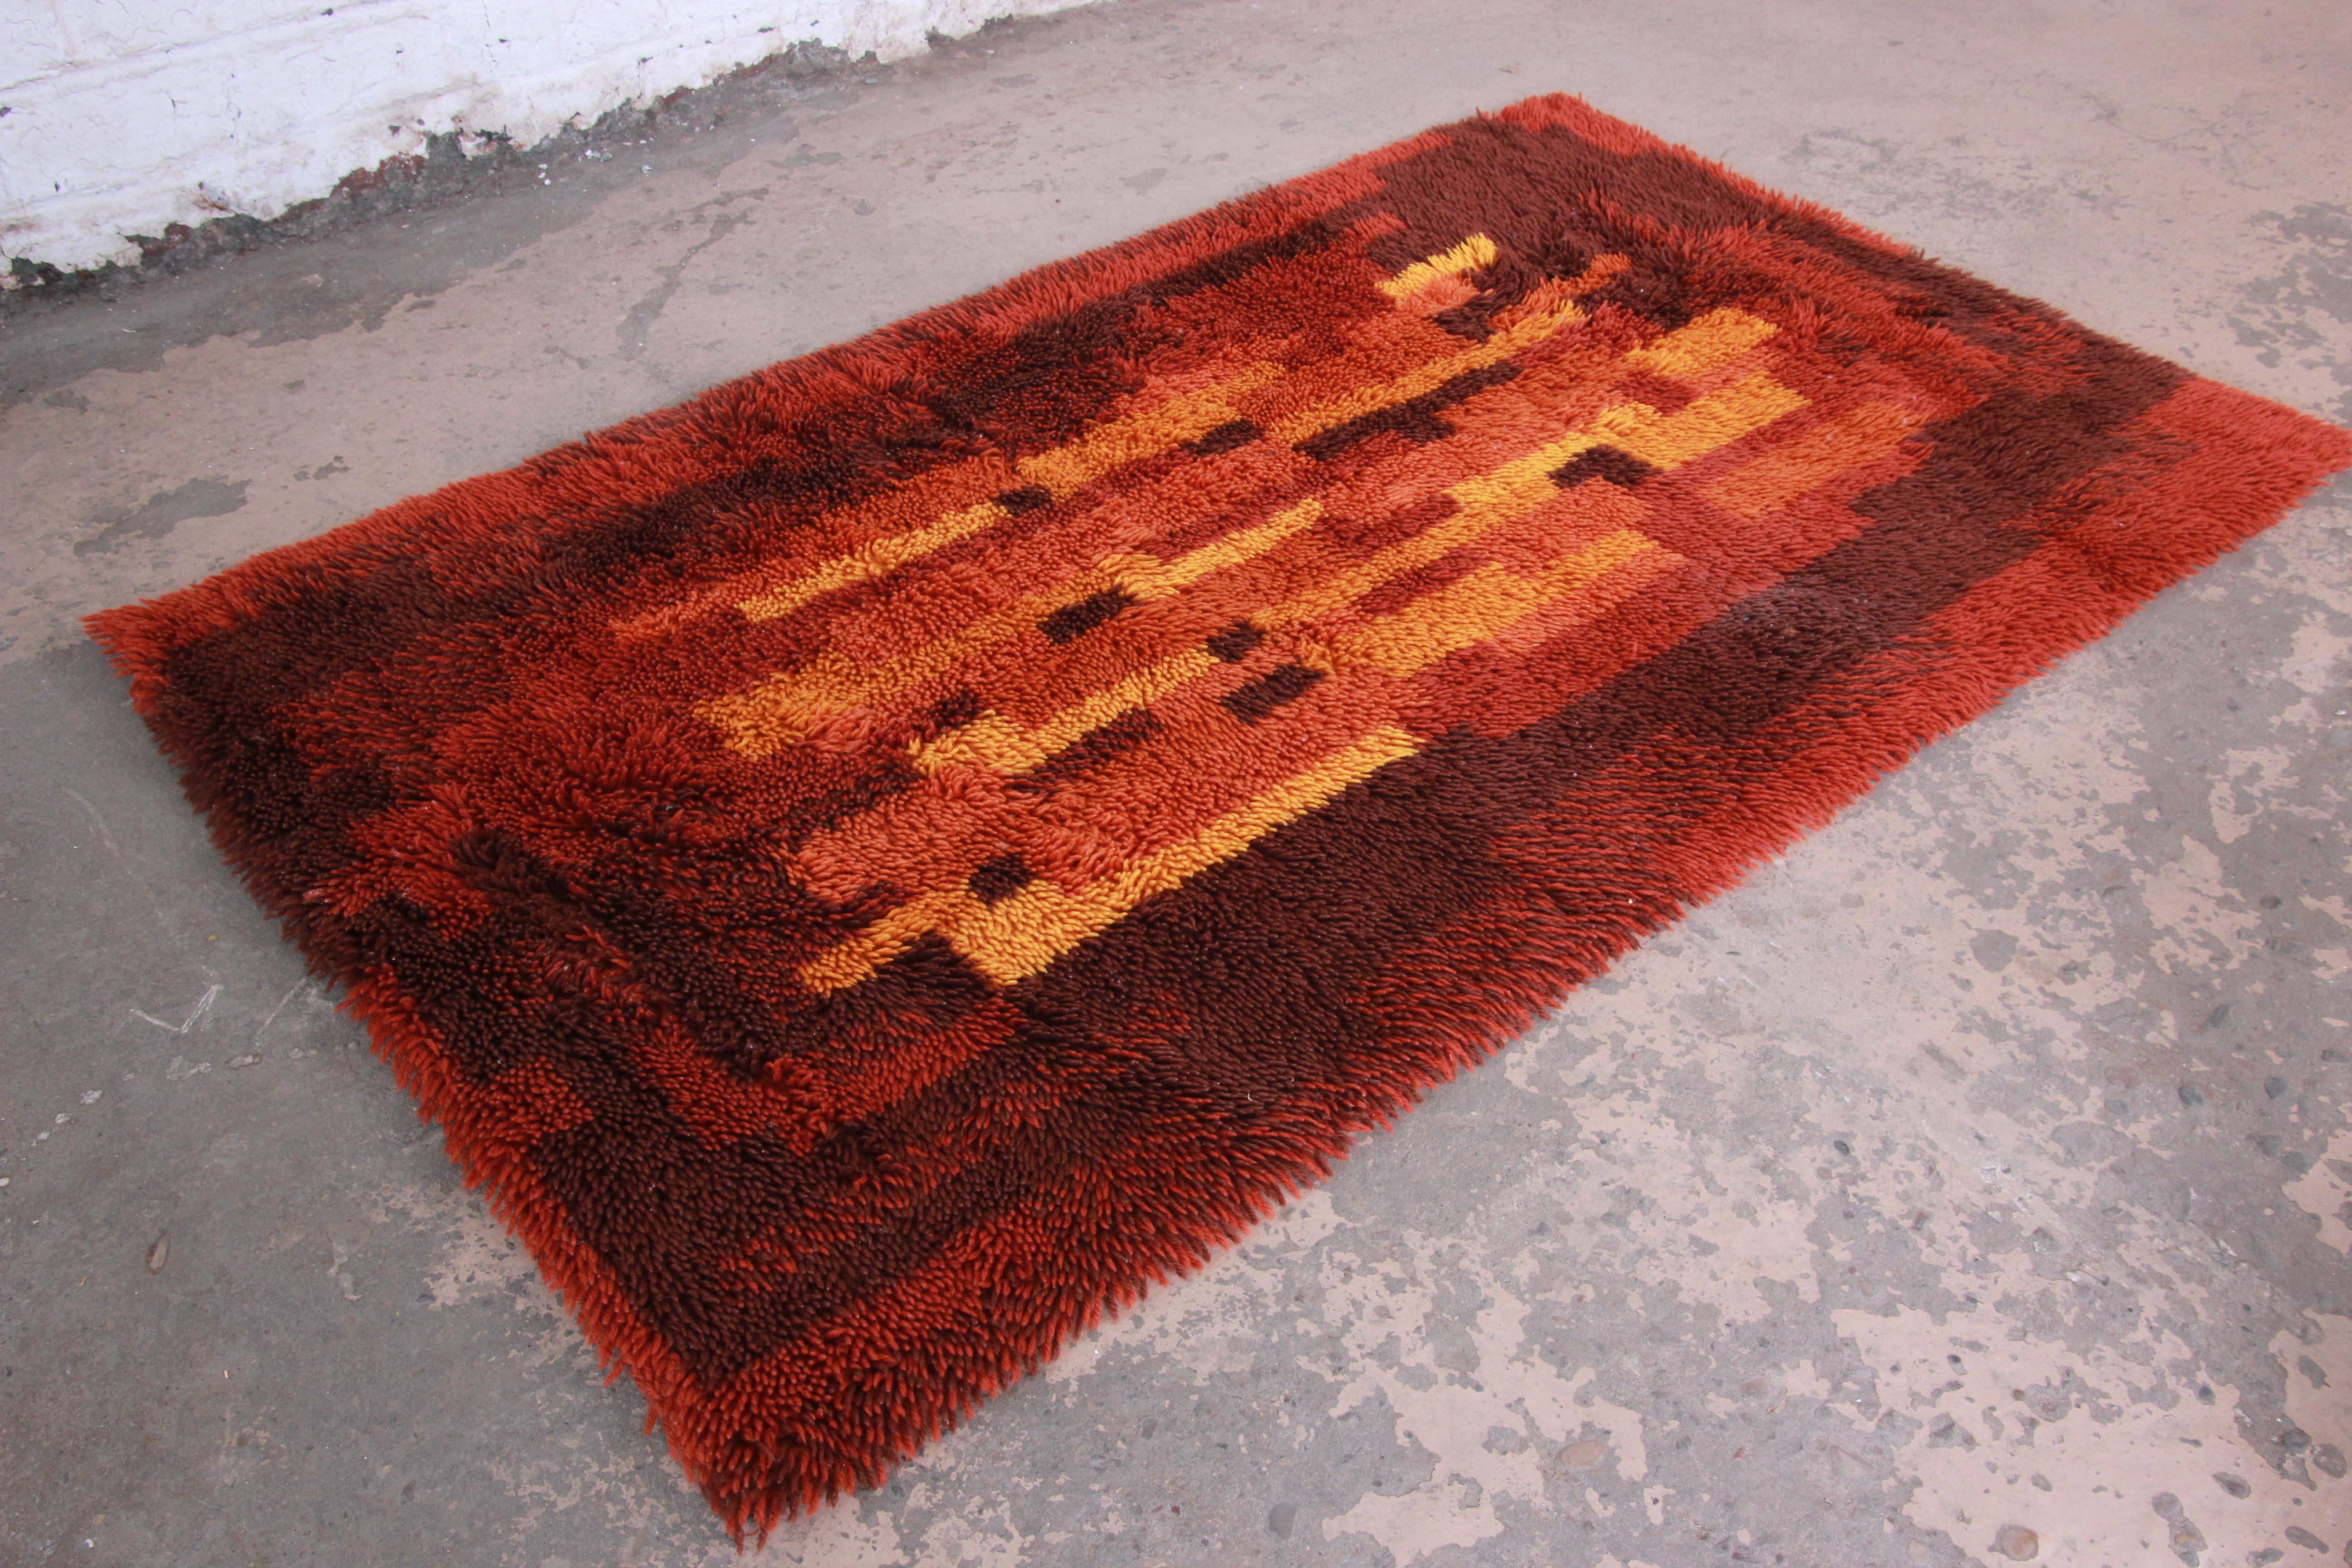 A gorgeous midcentury Danish modern rya shag rug. The rug has a unique abstract design, with vivid colors in red, orange, and yellow. It has a thick wool pile and is in very good vintage condition. Measures: 3'1